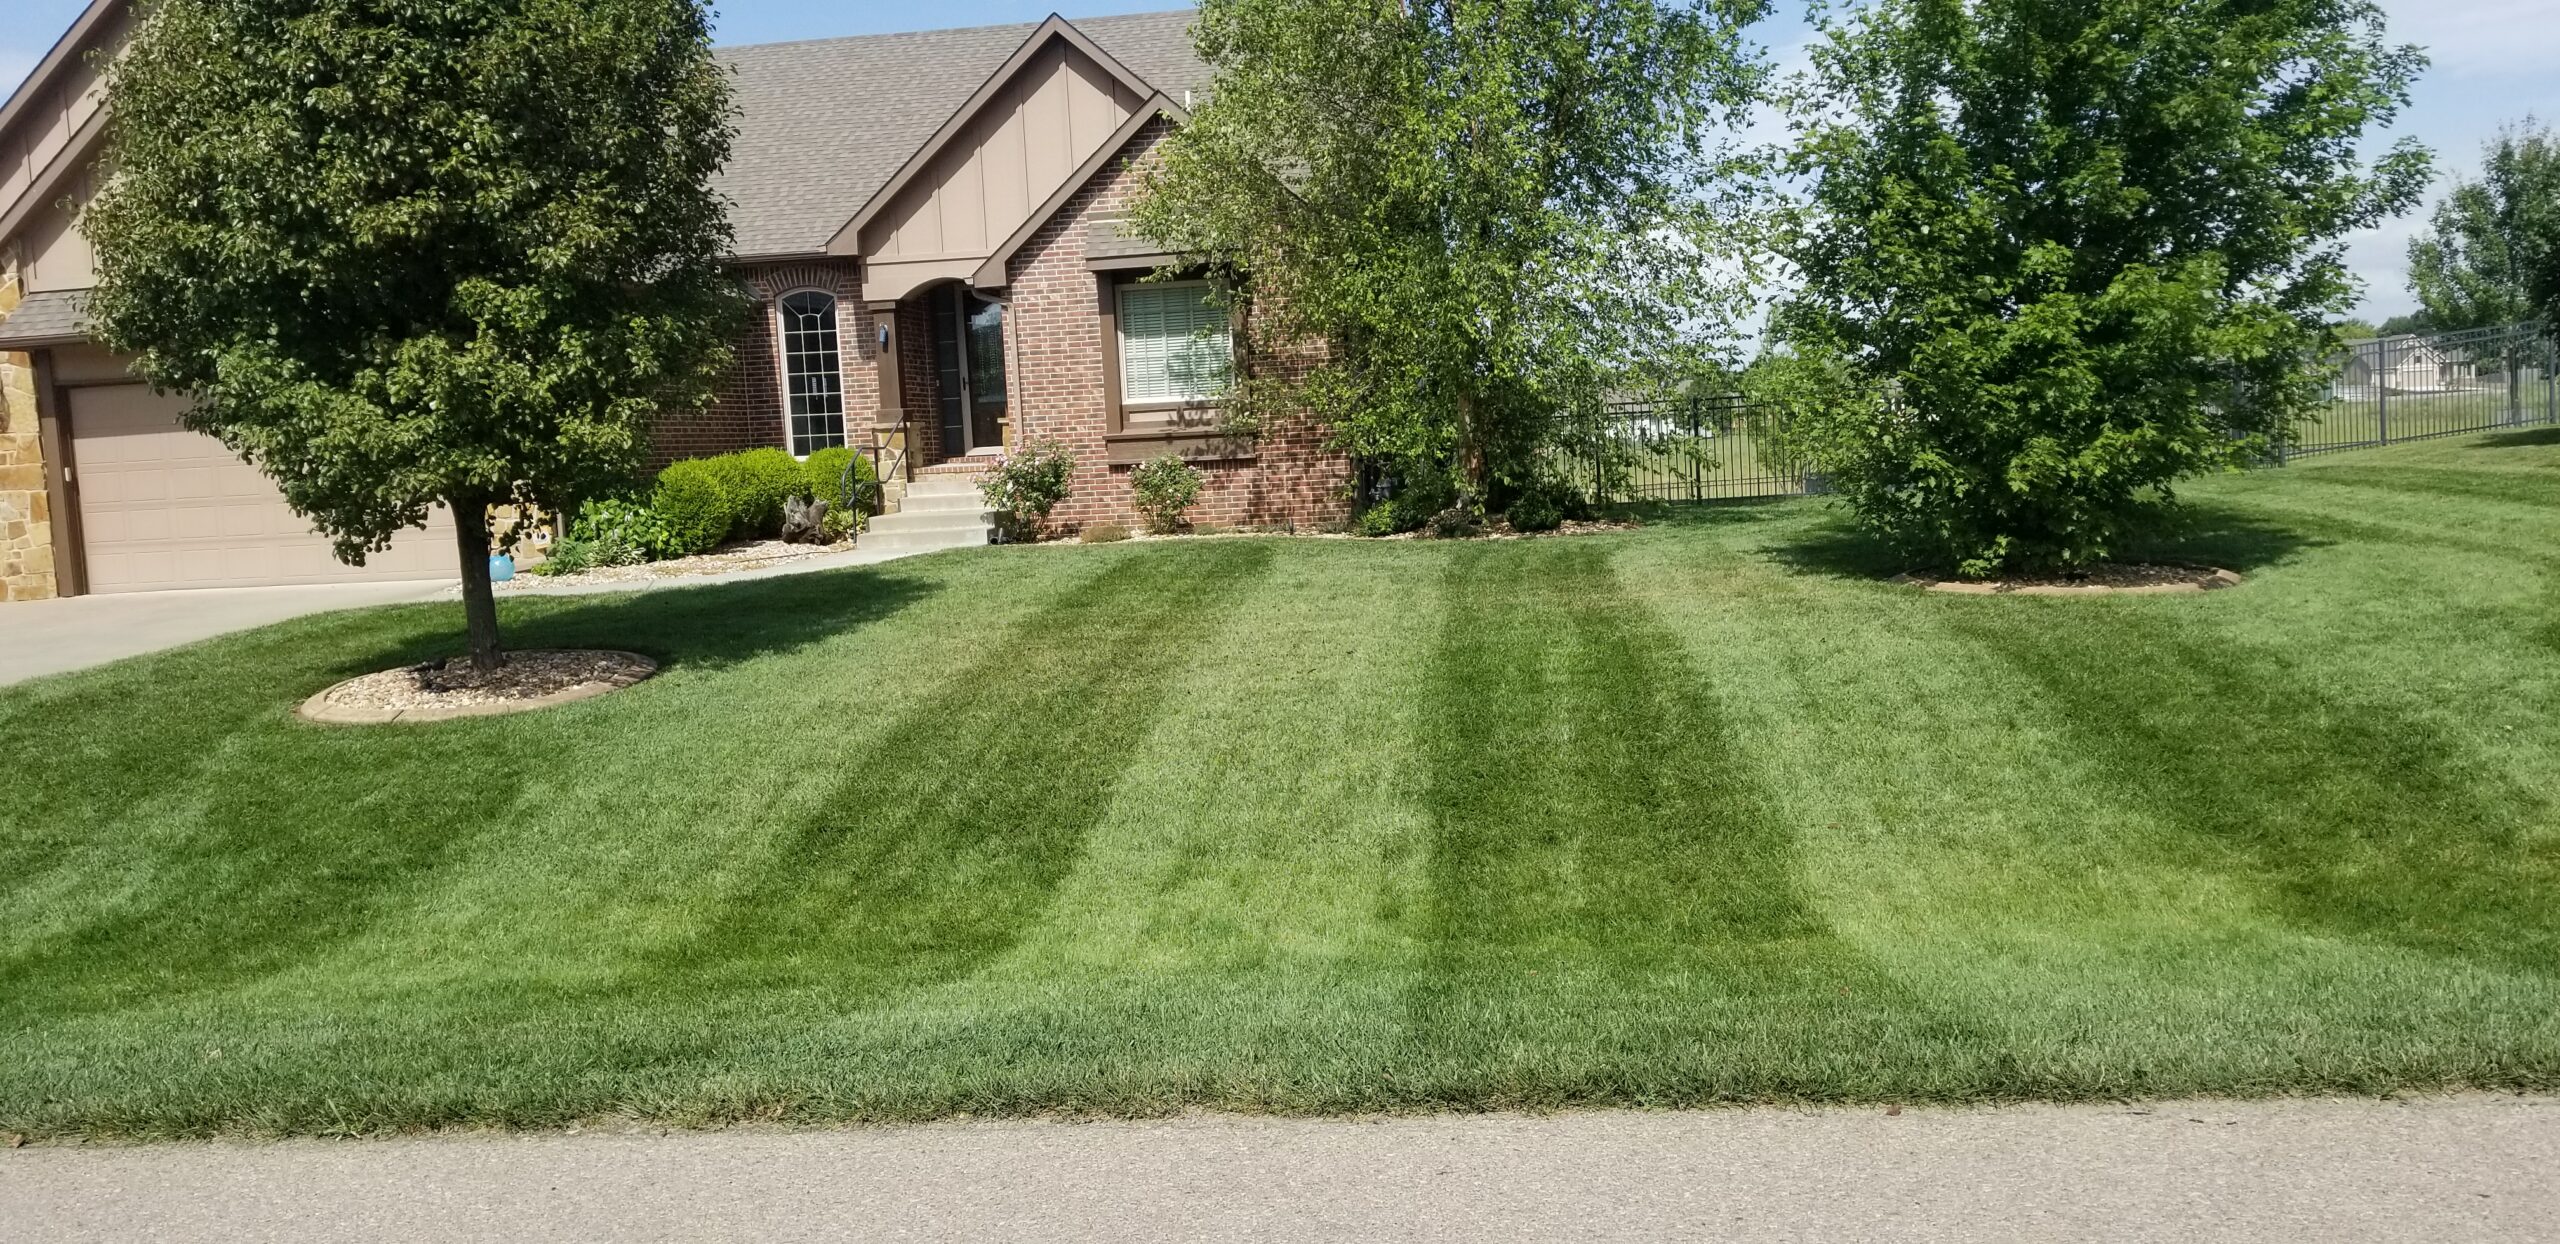 Get your Stripe on with a Cool Season Grass